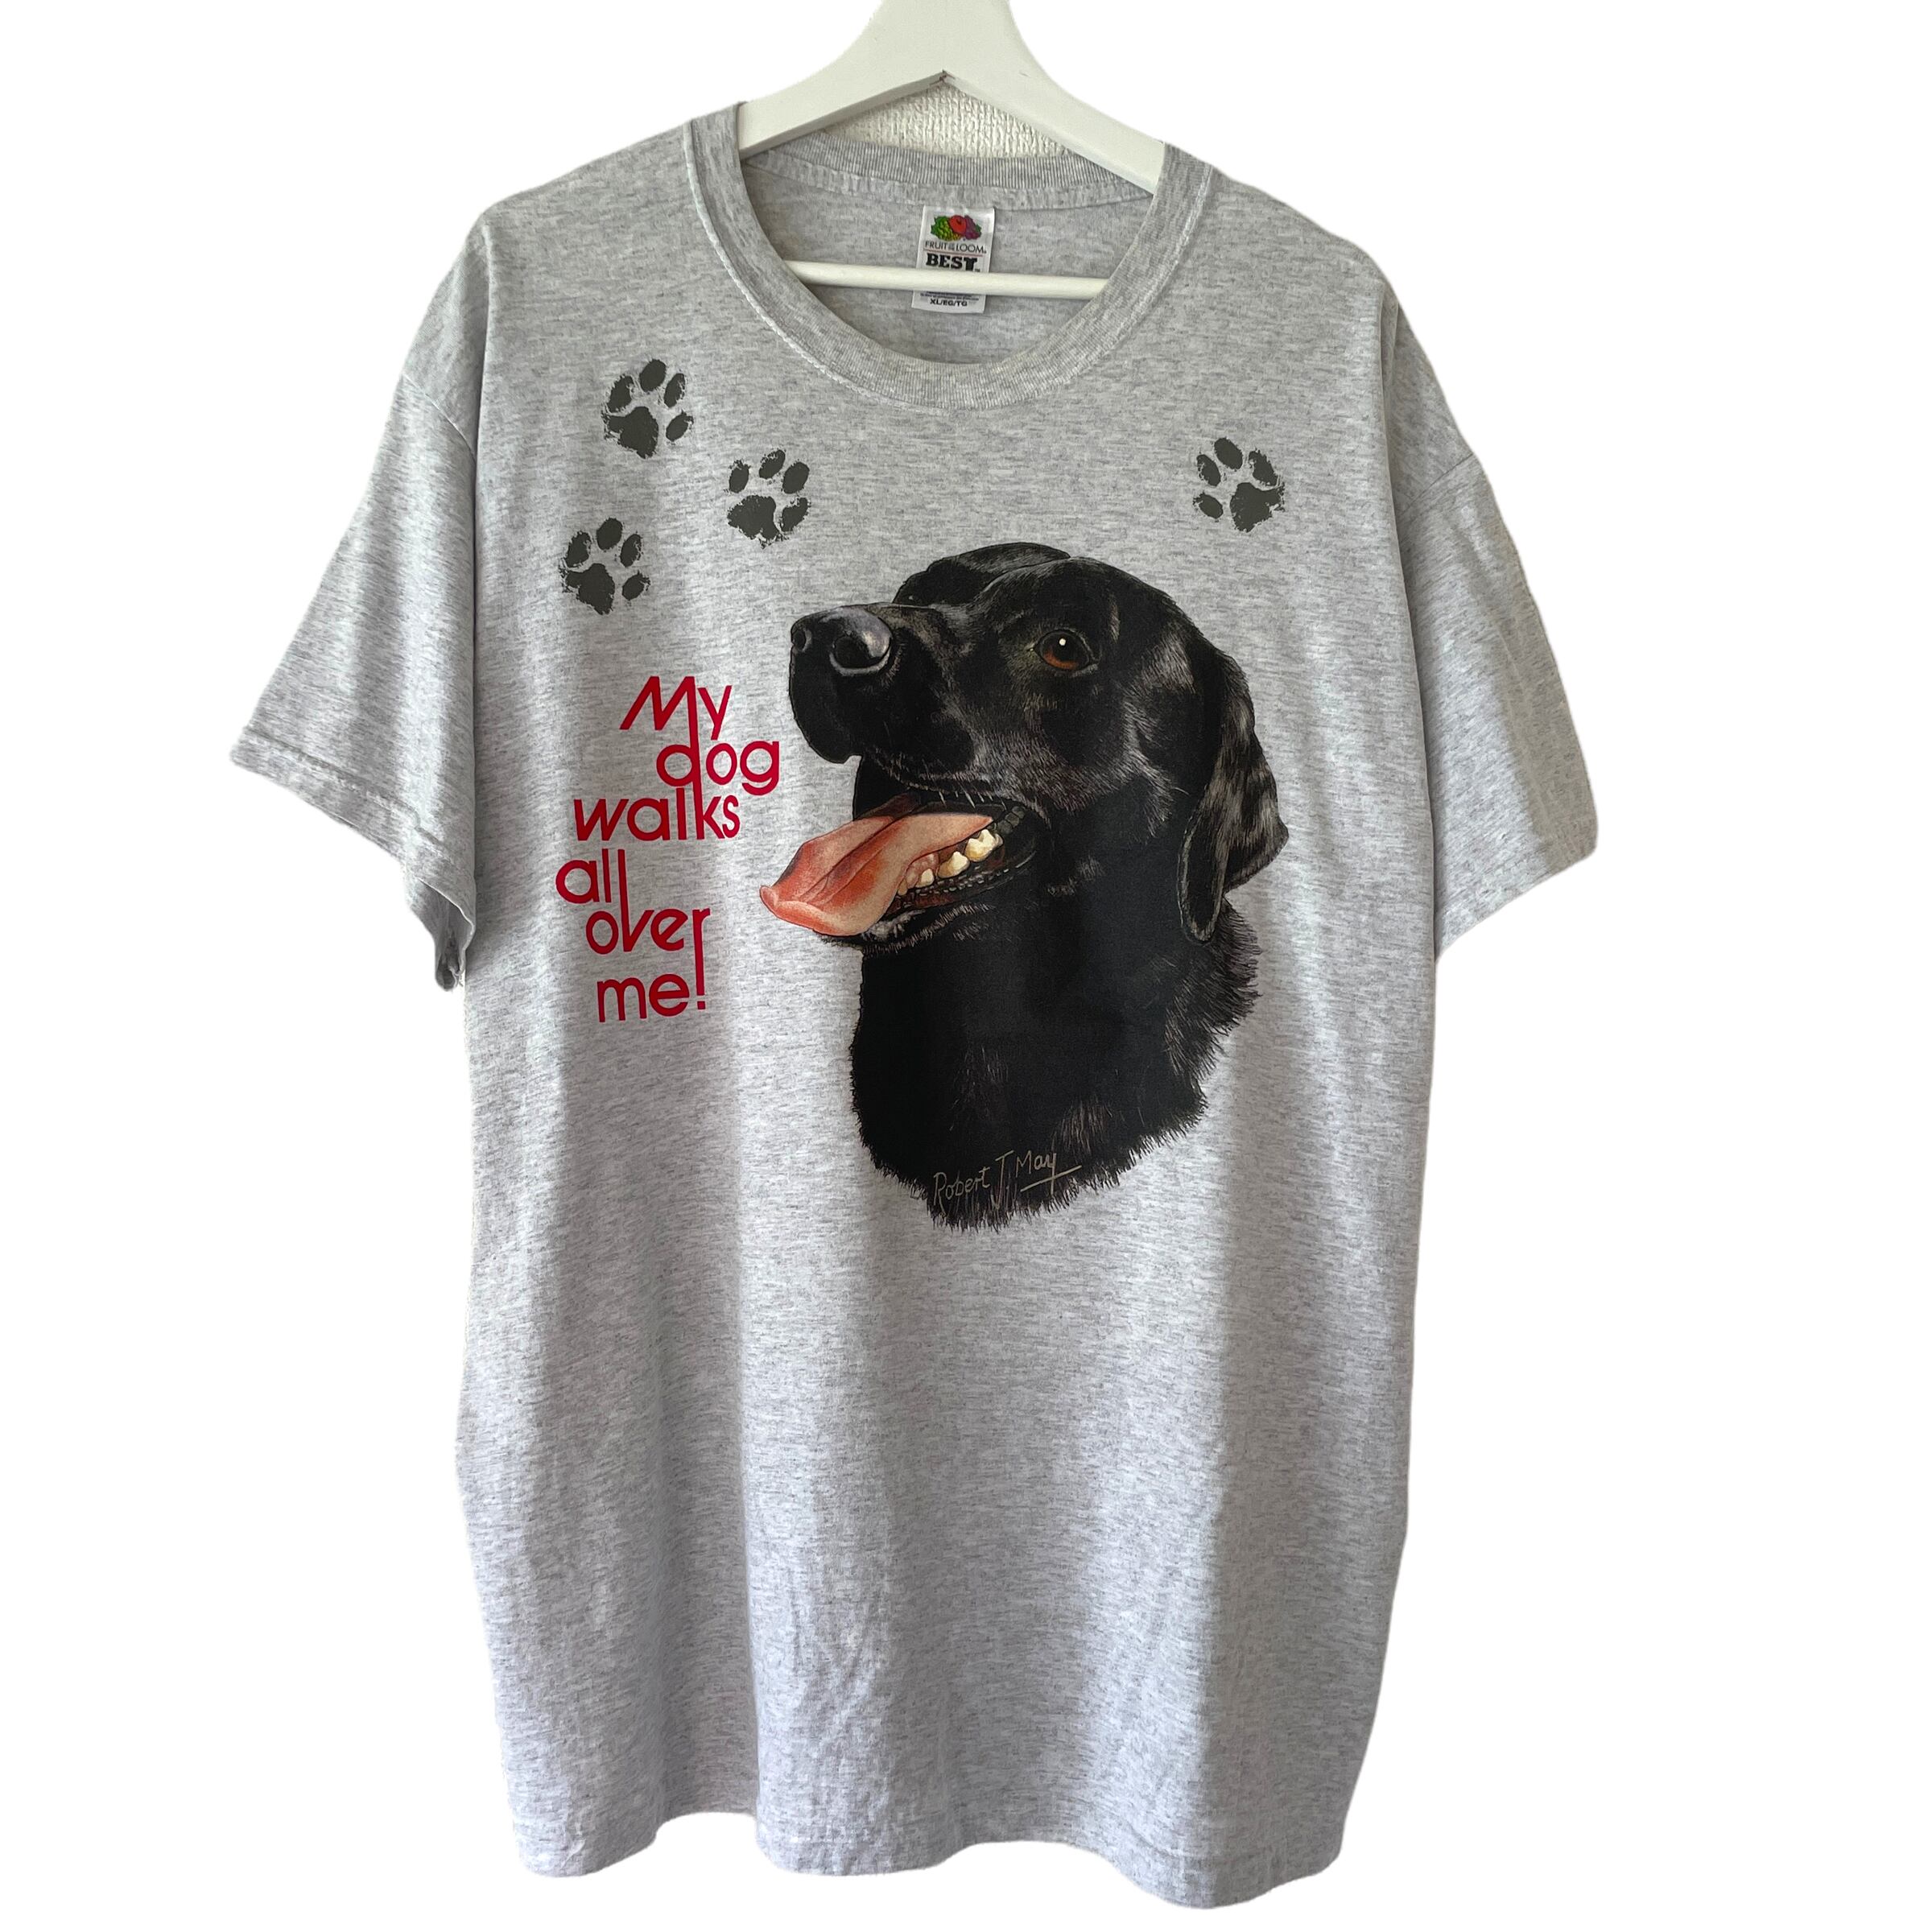 90's FRUIT OF THE LOOM BEST Dog print Tee made in USA